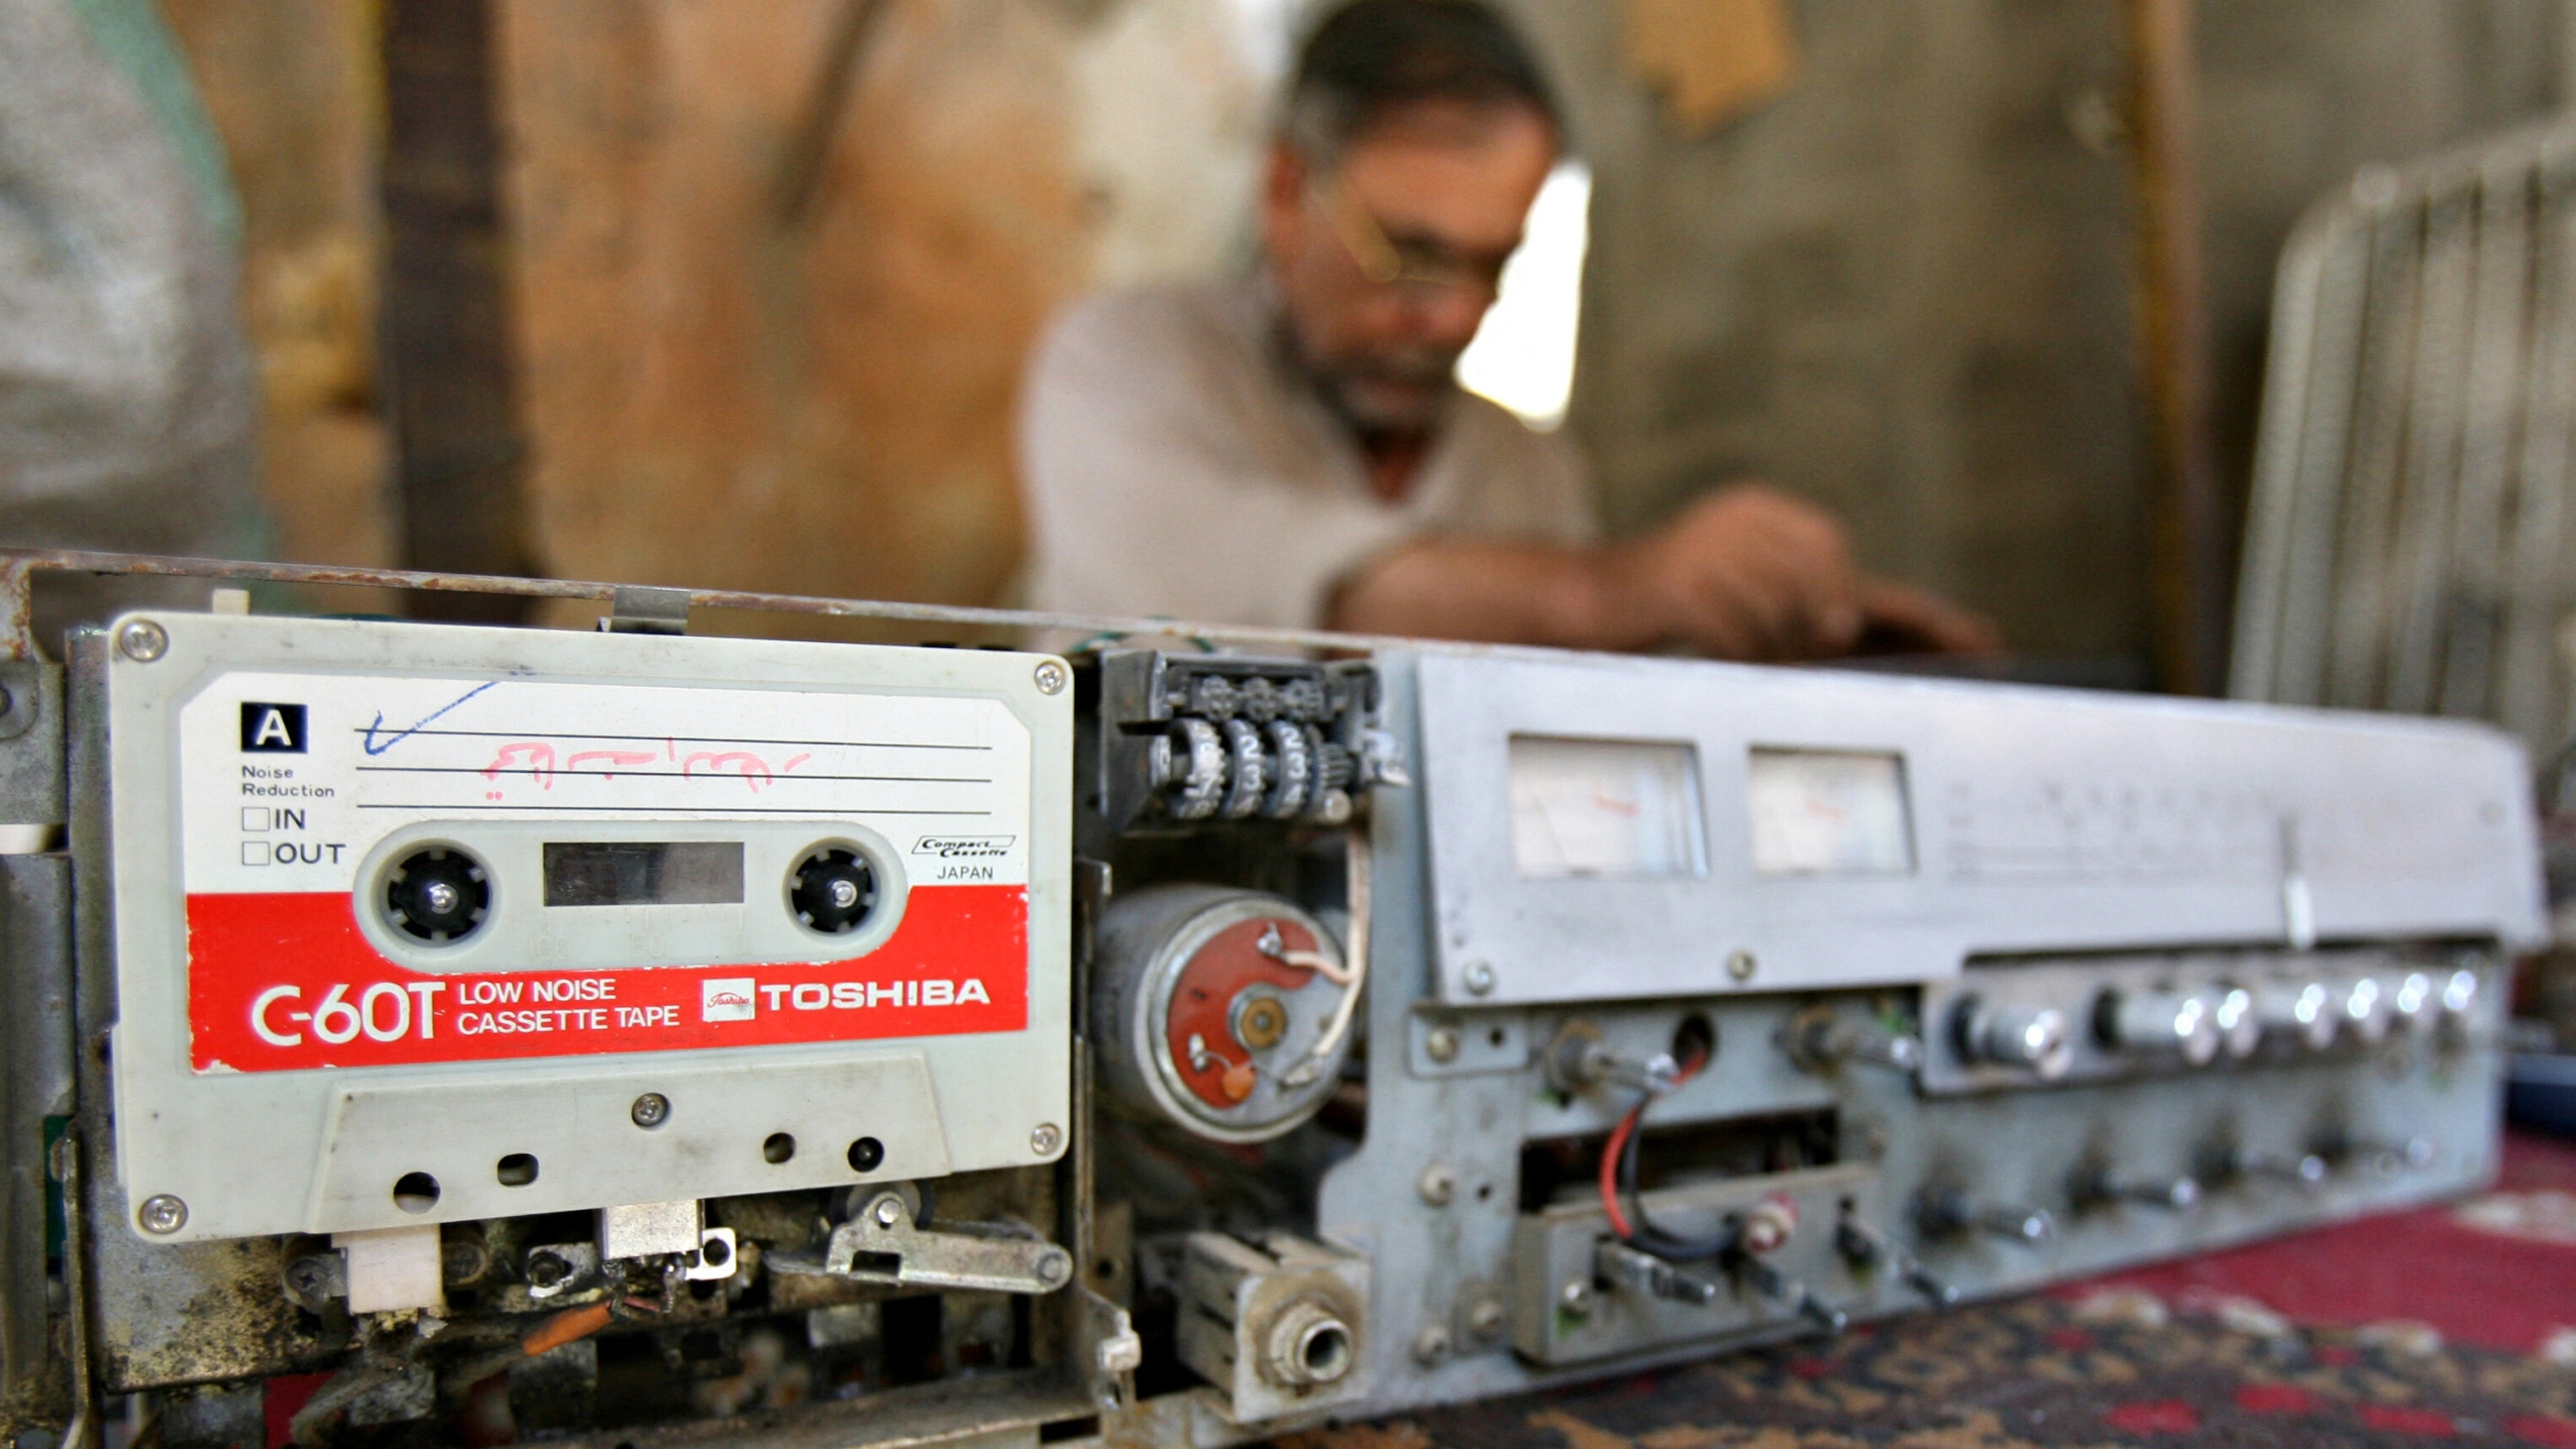 The cassette tape's cultural and political impact in the Middle East